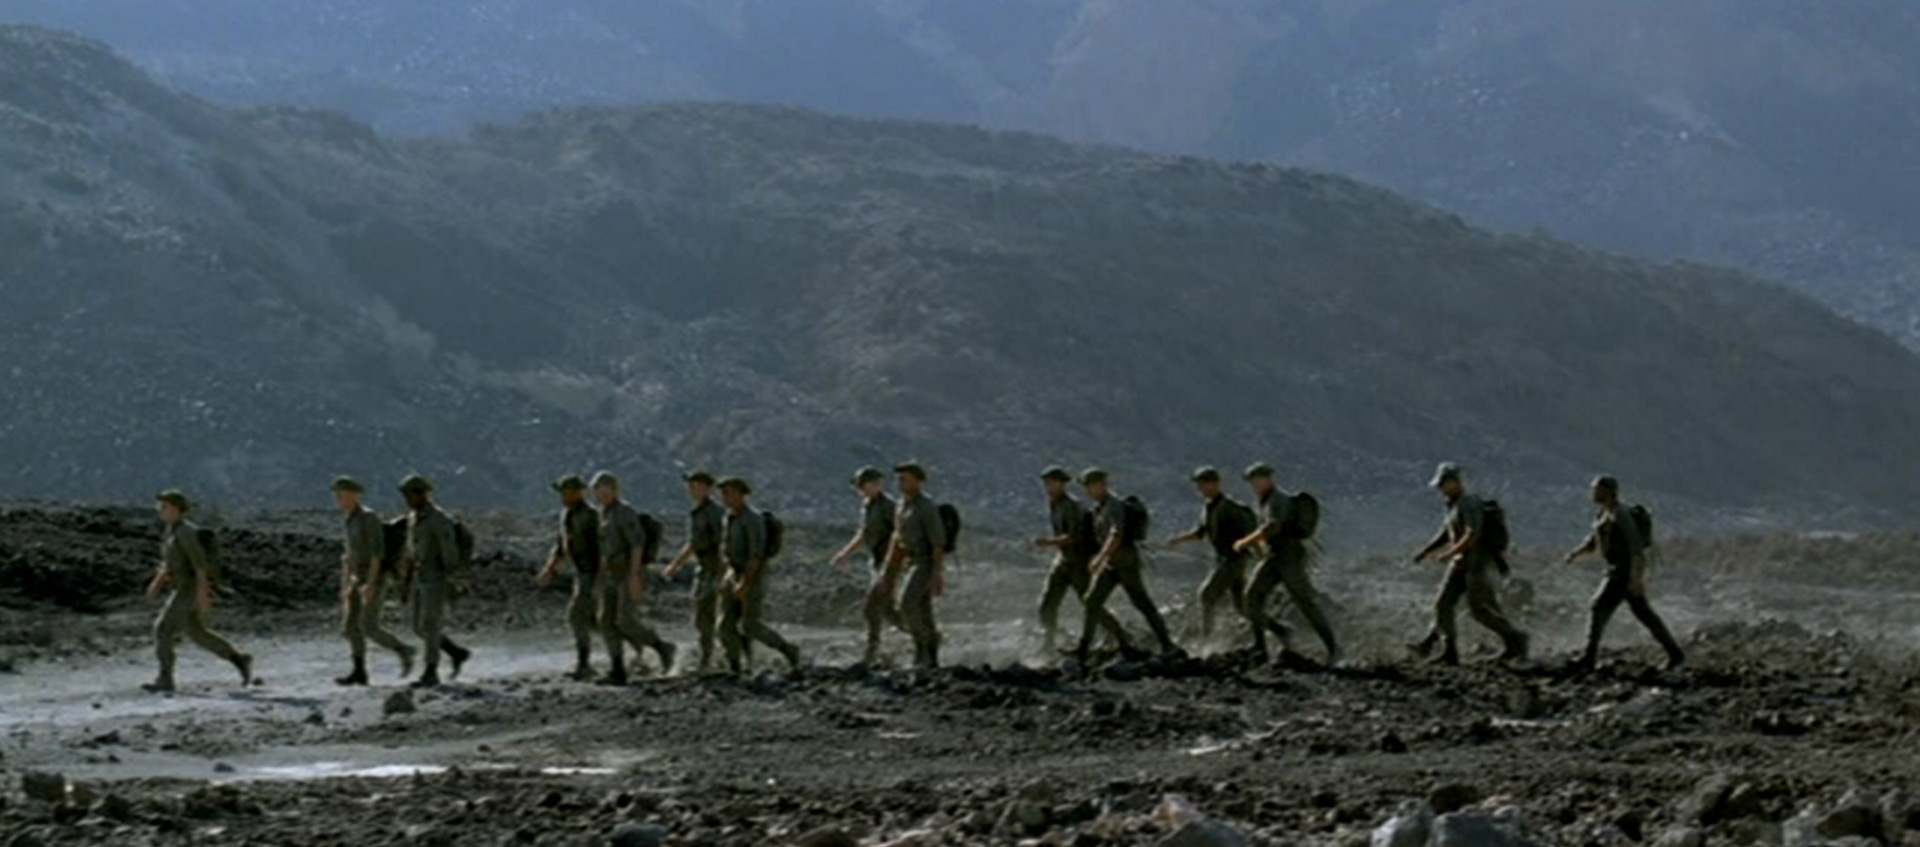 A group of soldiers march on a hillside